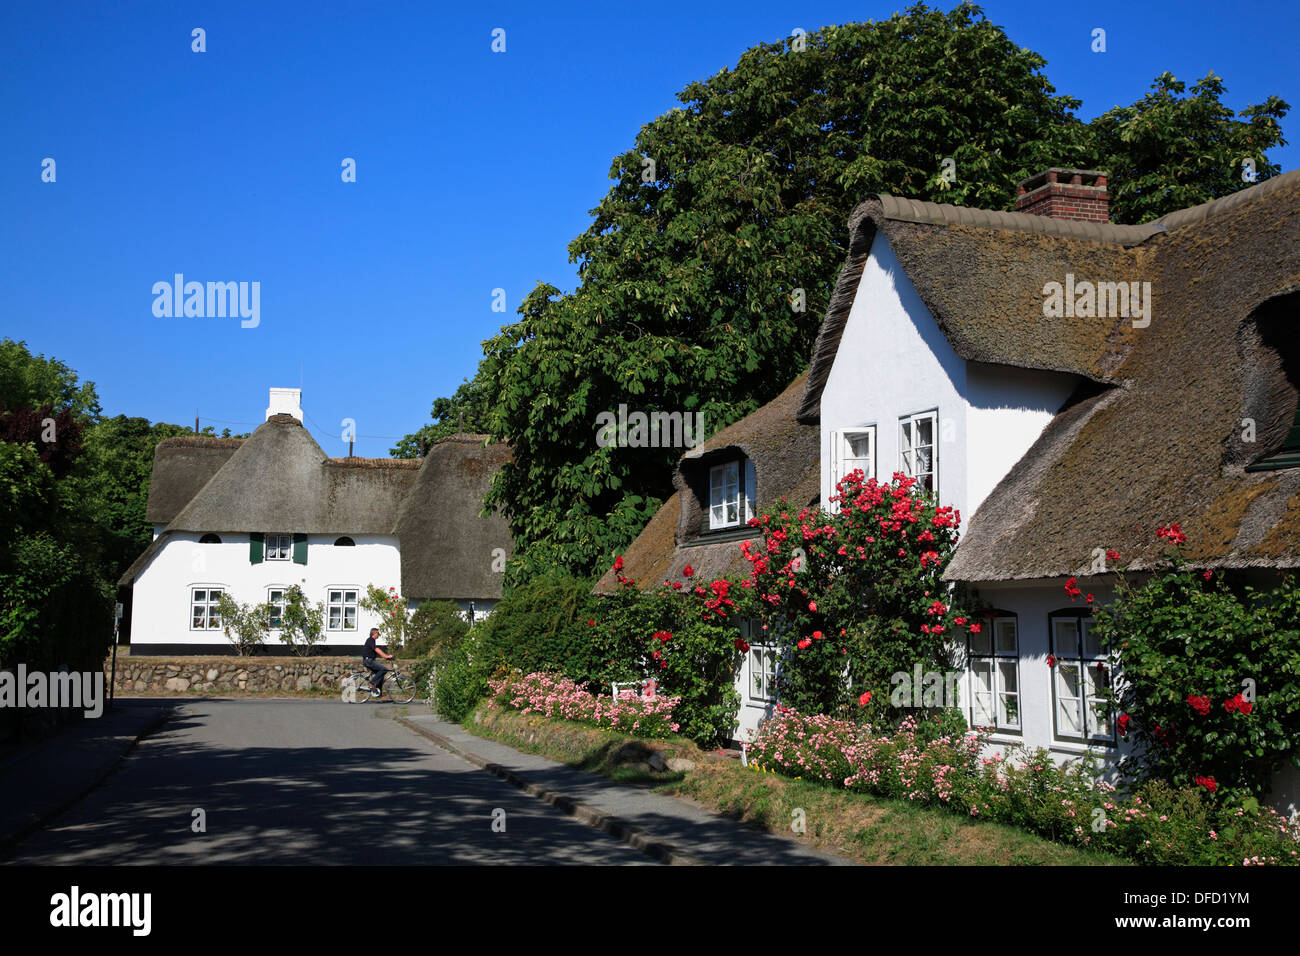 Thatched old frisian house in Keitum, Sylt Island, Schleswig-Holstein, Germany Stock Photo